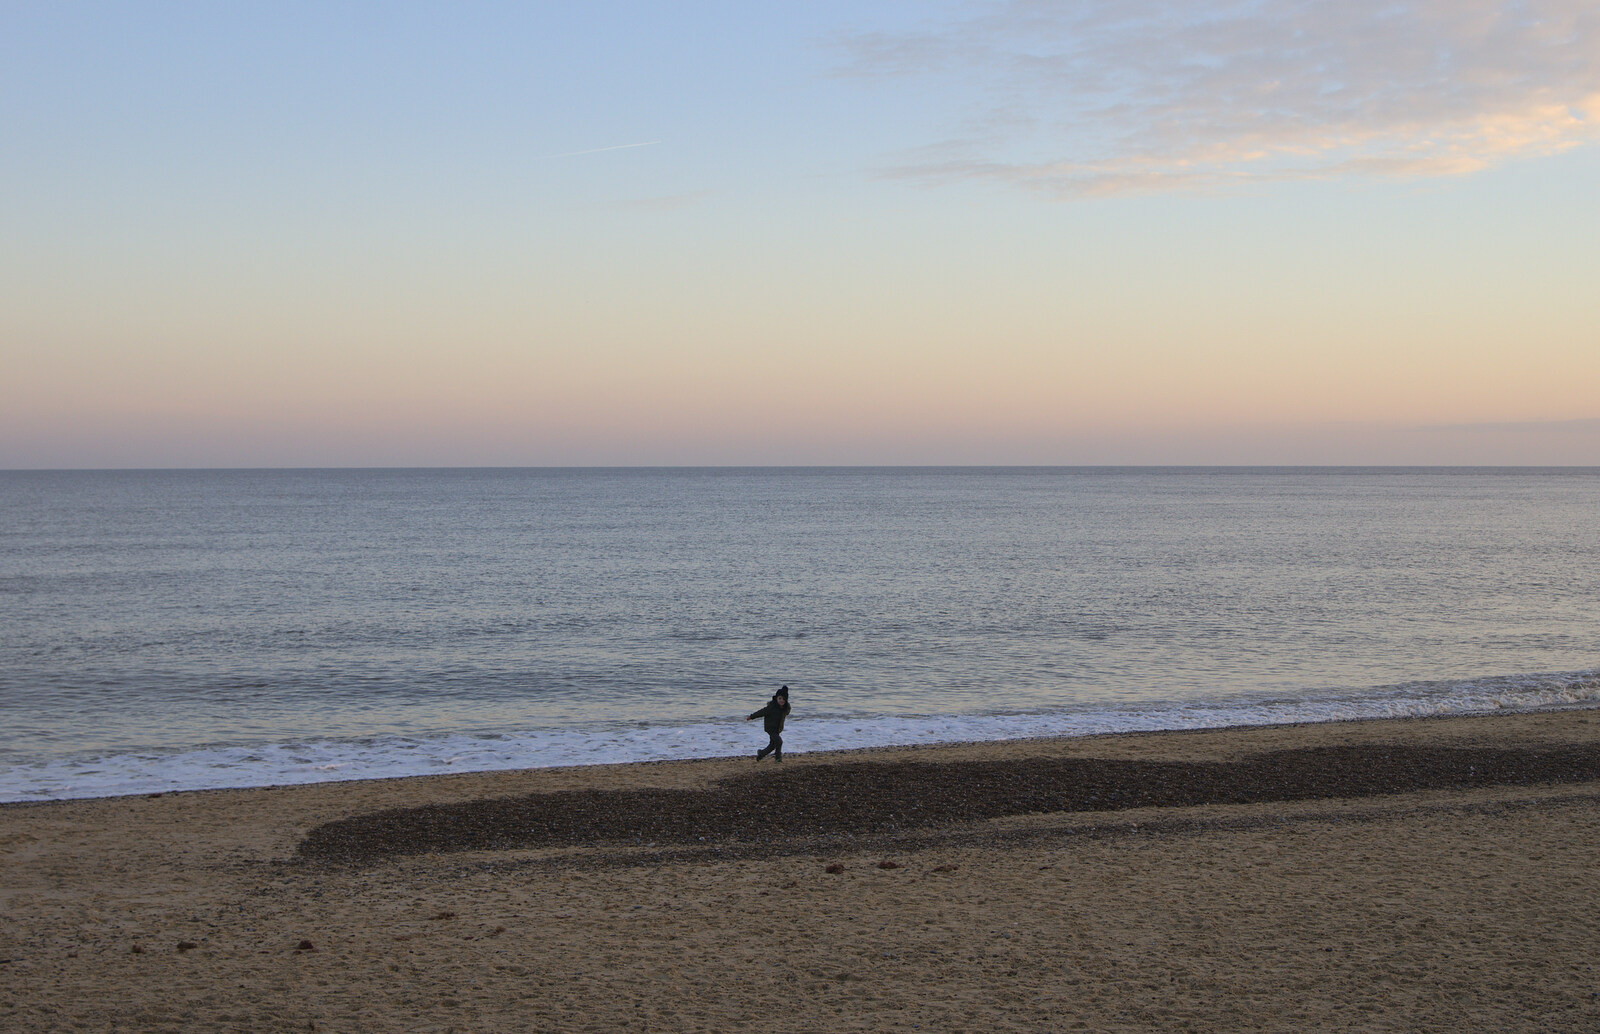 Fred runs around on the beach from Sunset on the Beach, Southwold, Suffolk - 30th December 2014